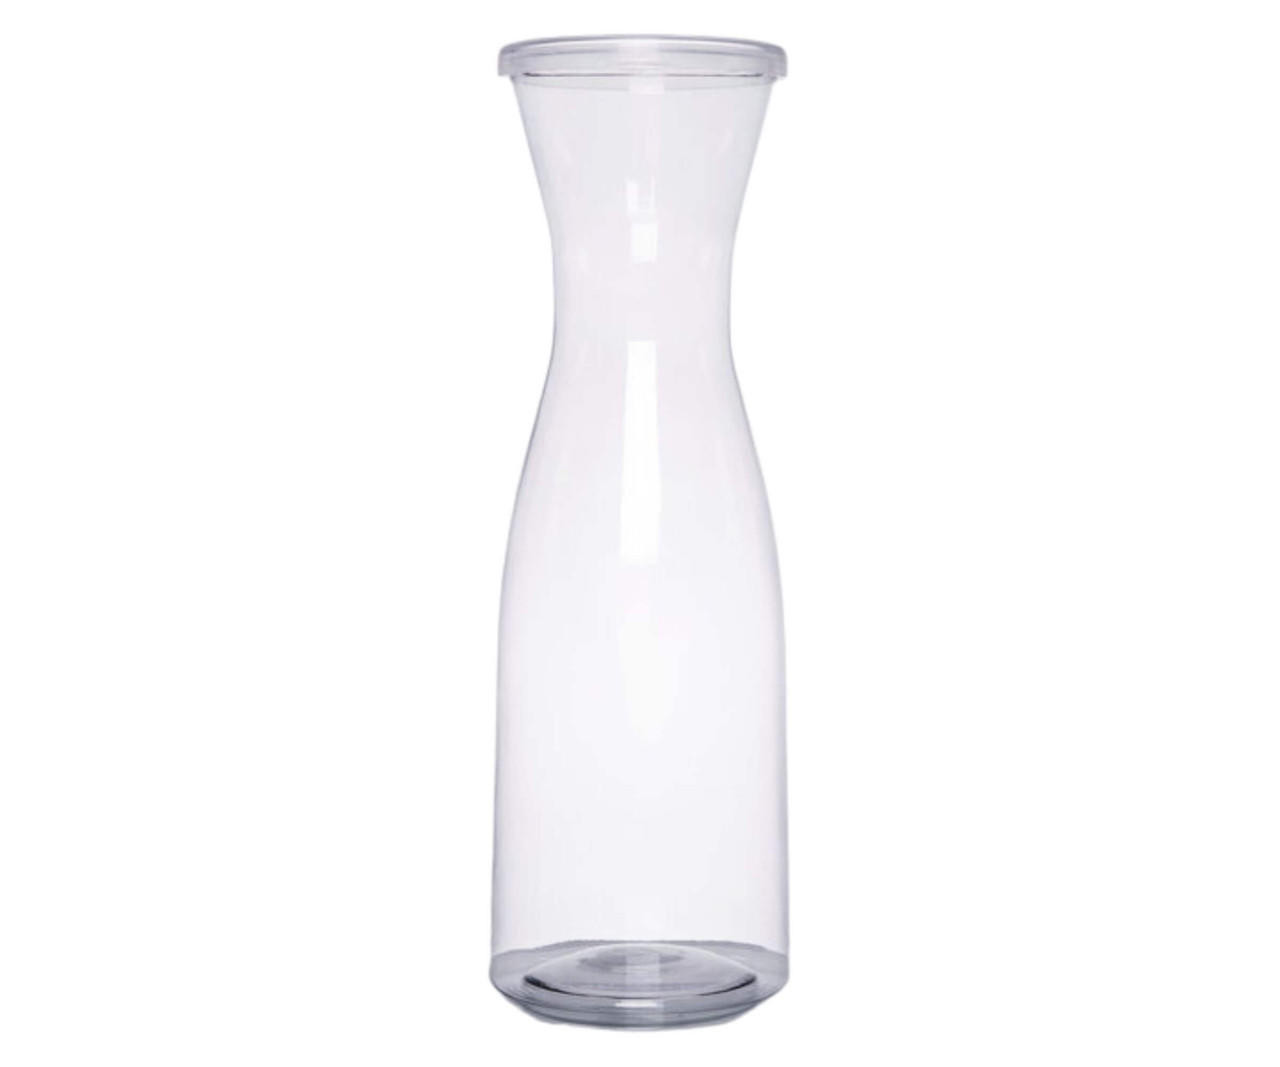  Fineline Platter Pleasers Disposable 35 oz. Clear Plastic Carafe with Lid 